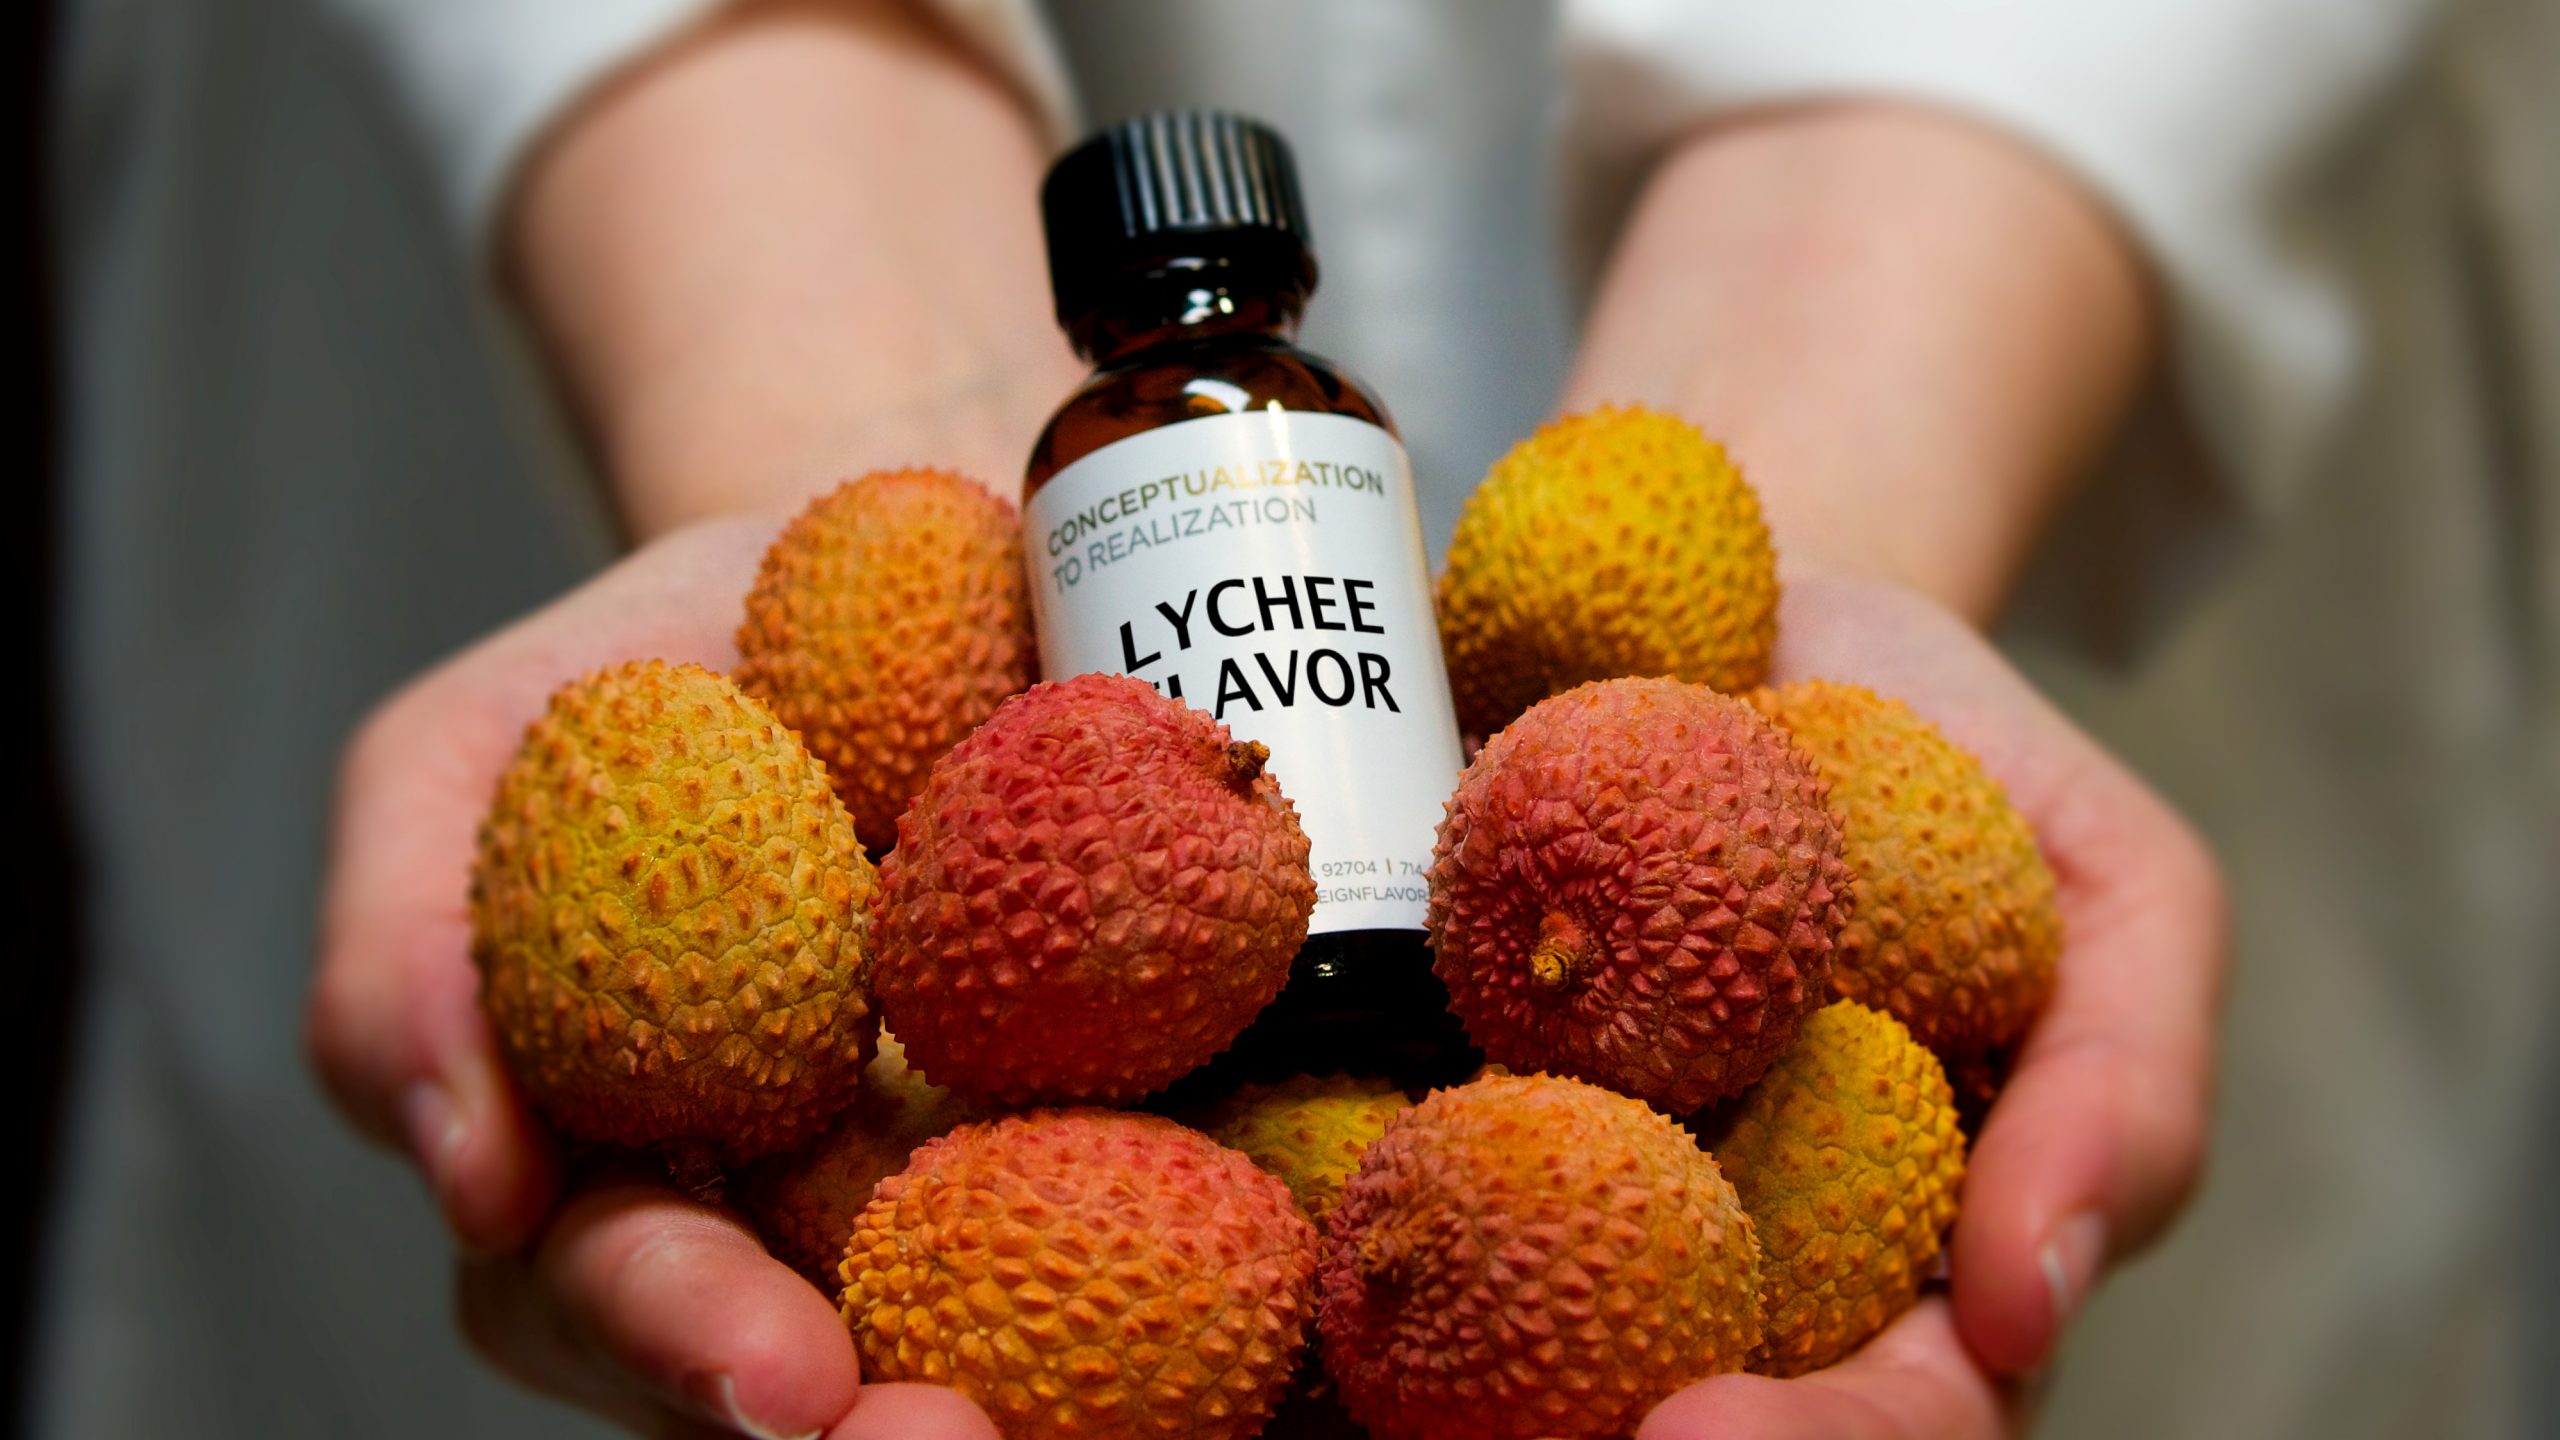 Lychee – July Flavor of the Month Image